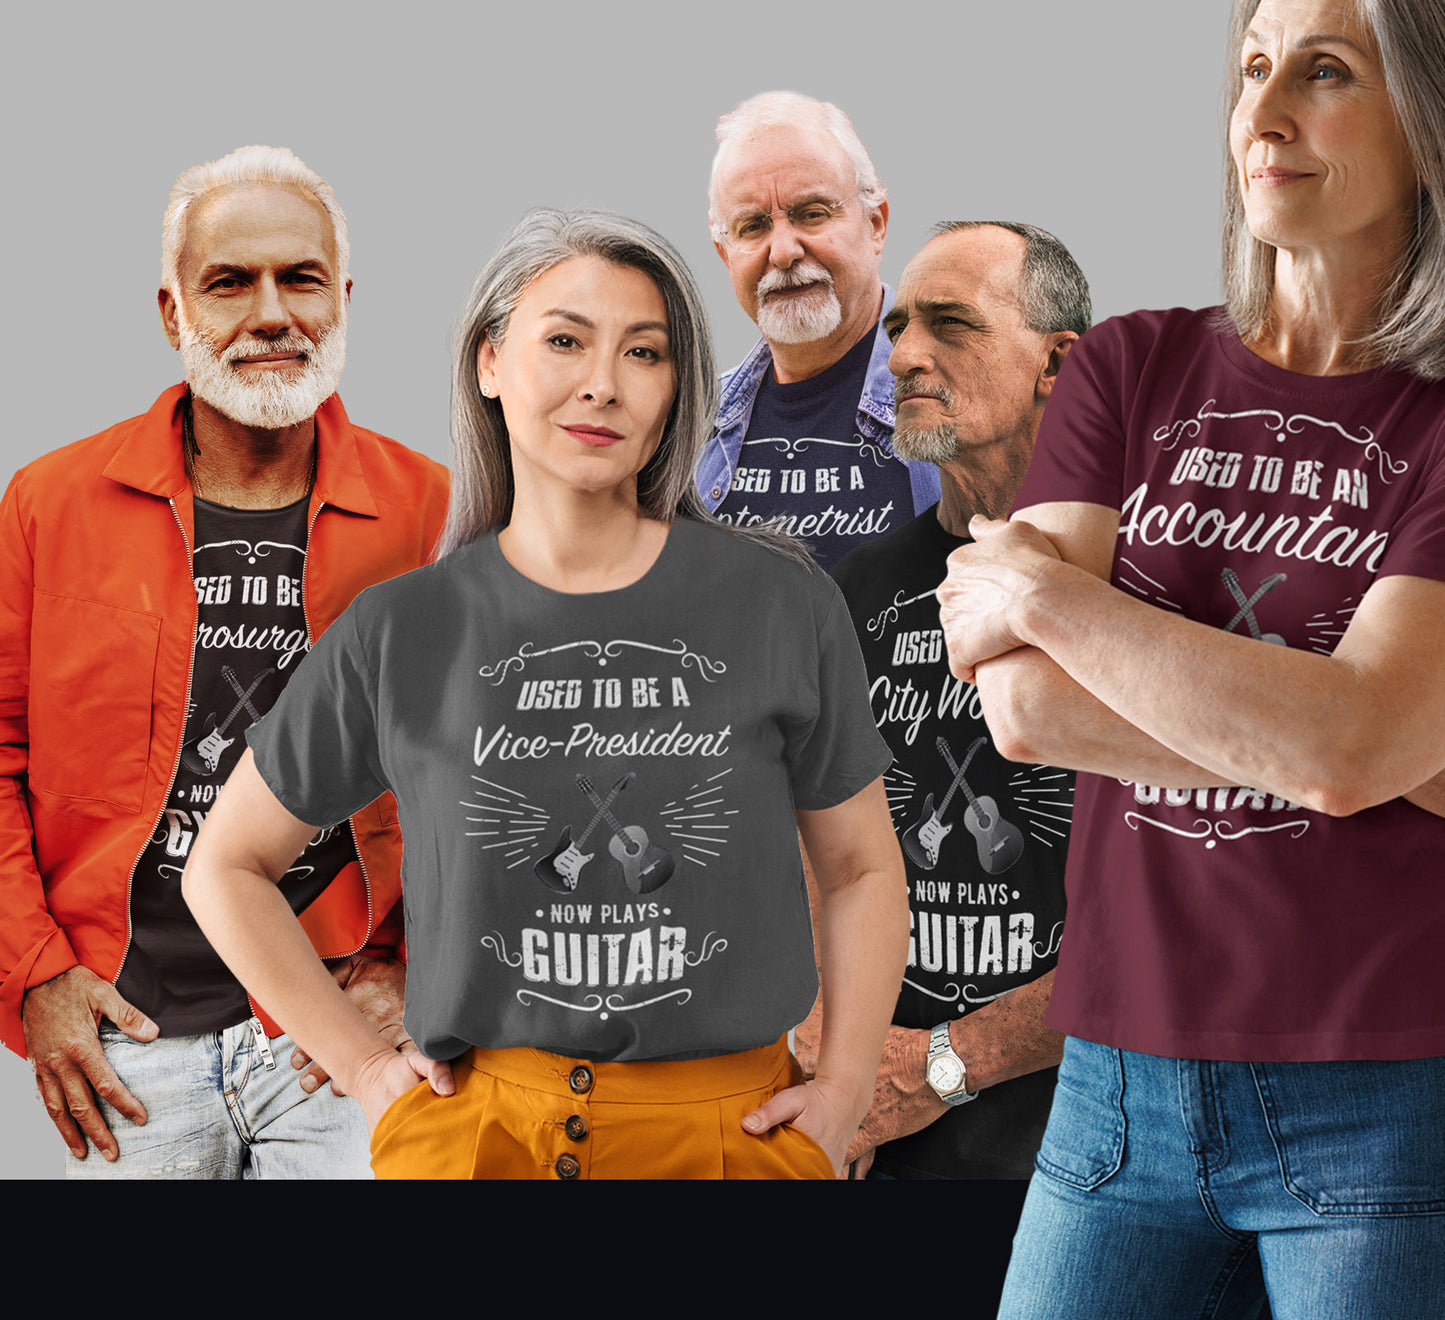 Used to be a MARKETING MANAGER; Now Plays GUITAR - Funny Retirement Gift, Unisex T-shirt Bella+Canvas 3001, dark colors for amateur musician/guitar player